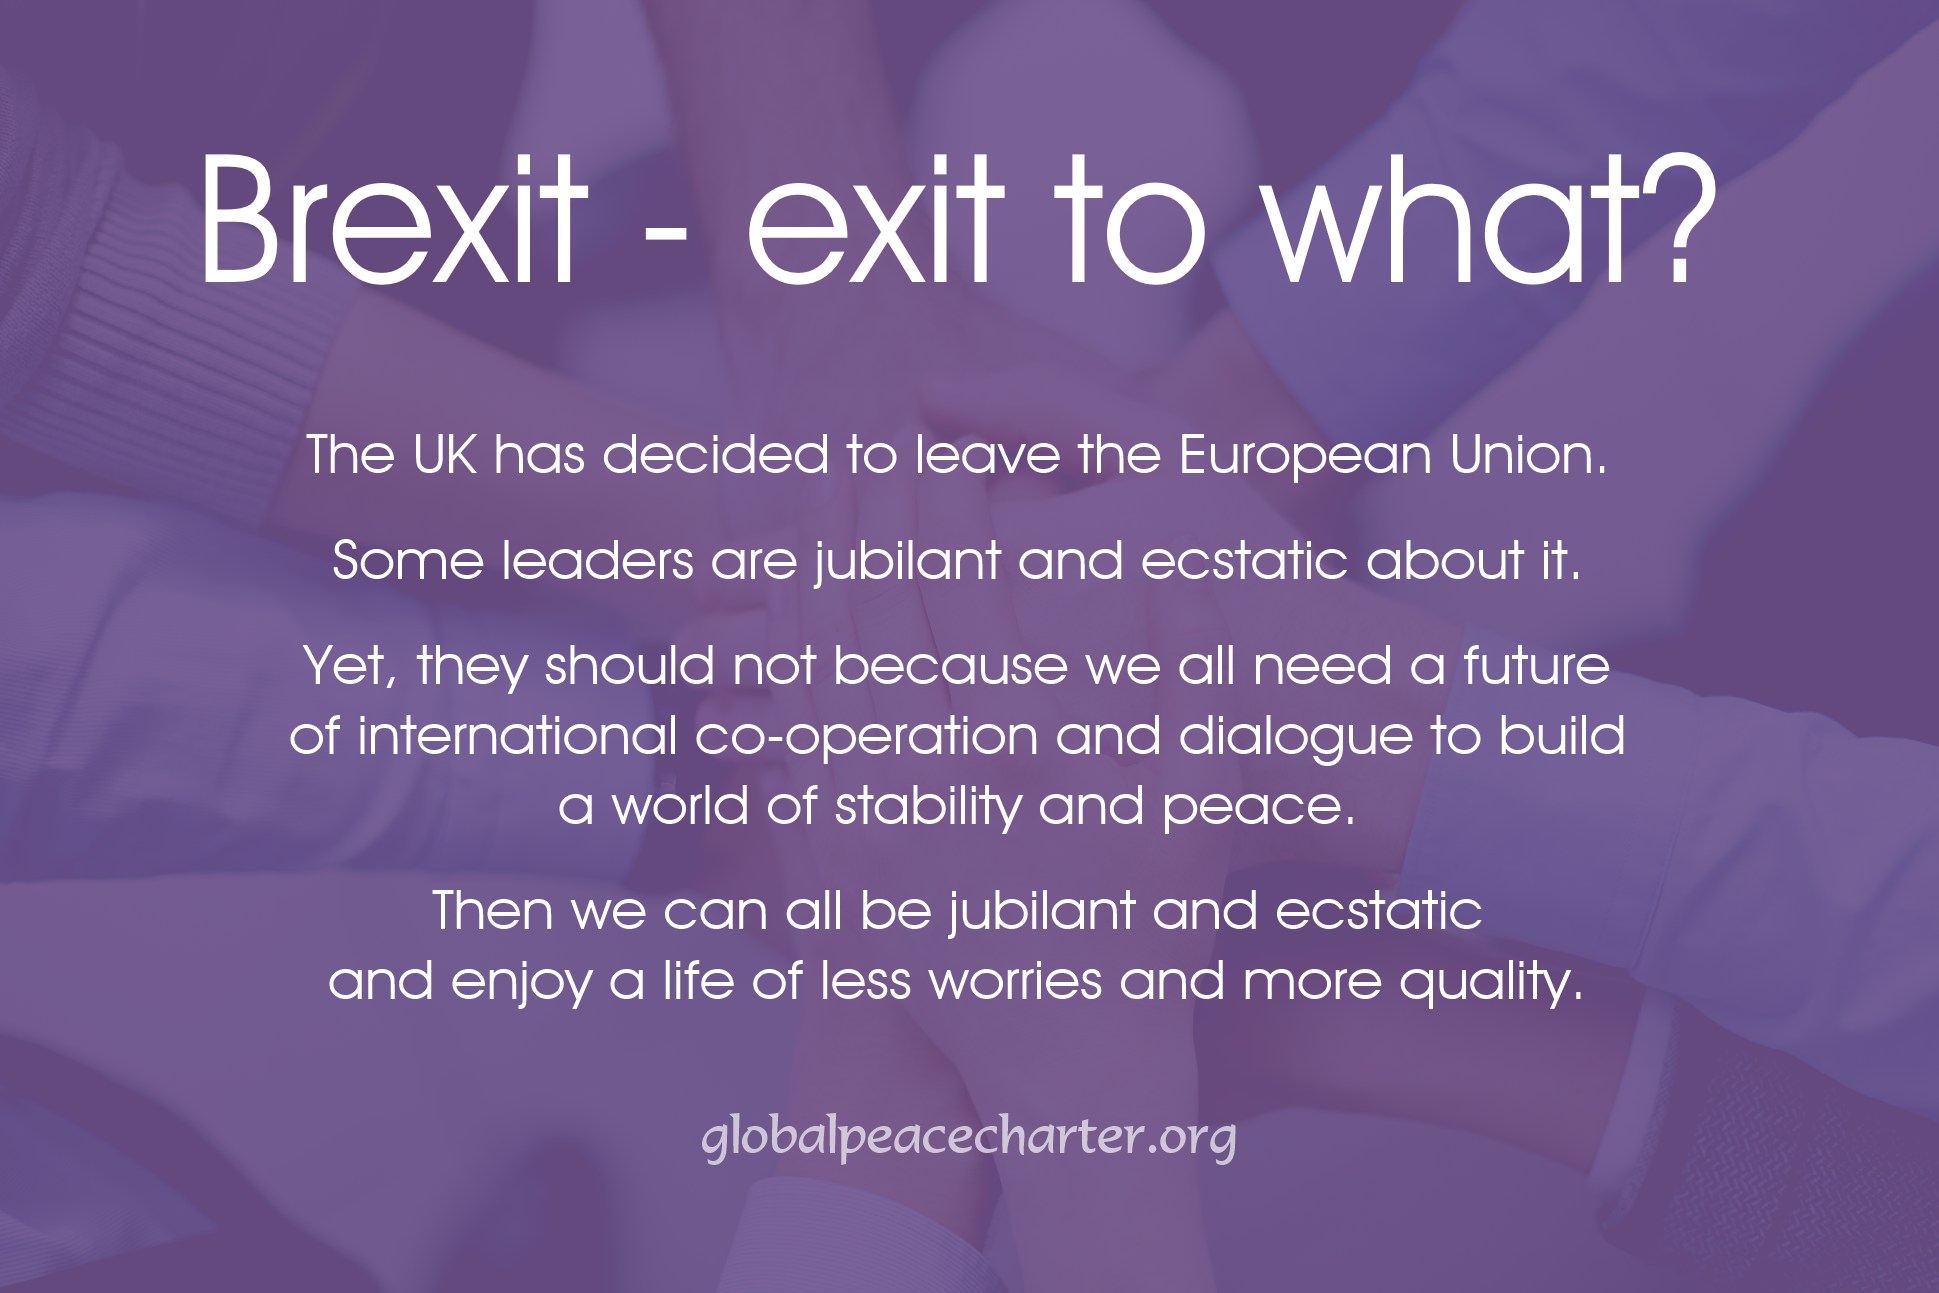 Brexit - exit to what?